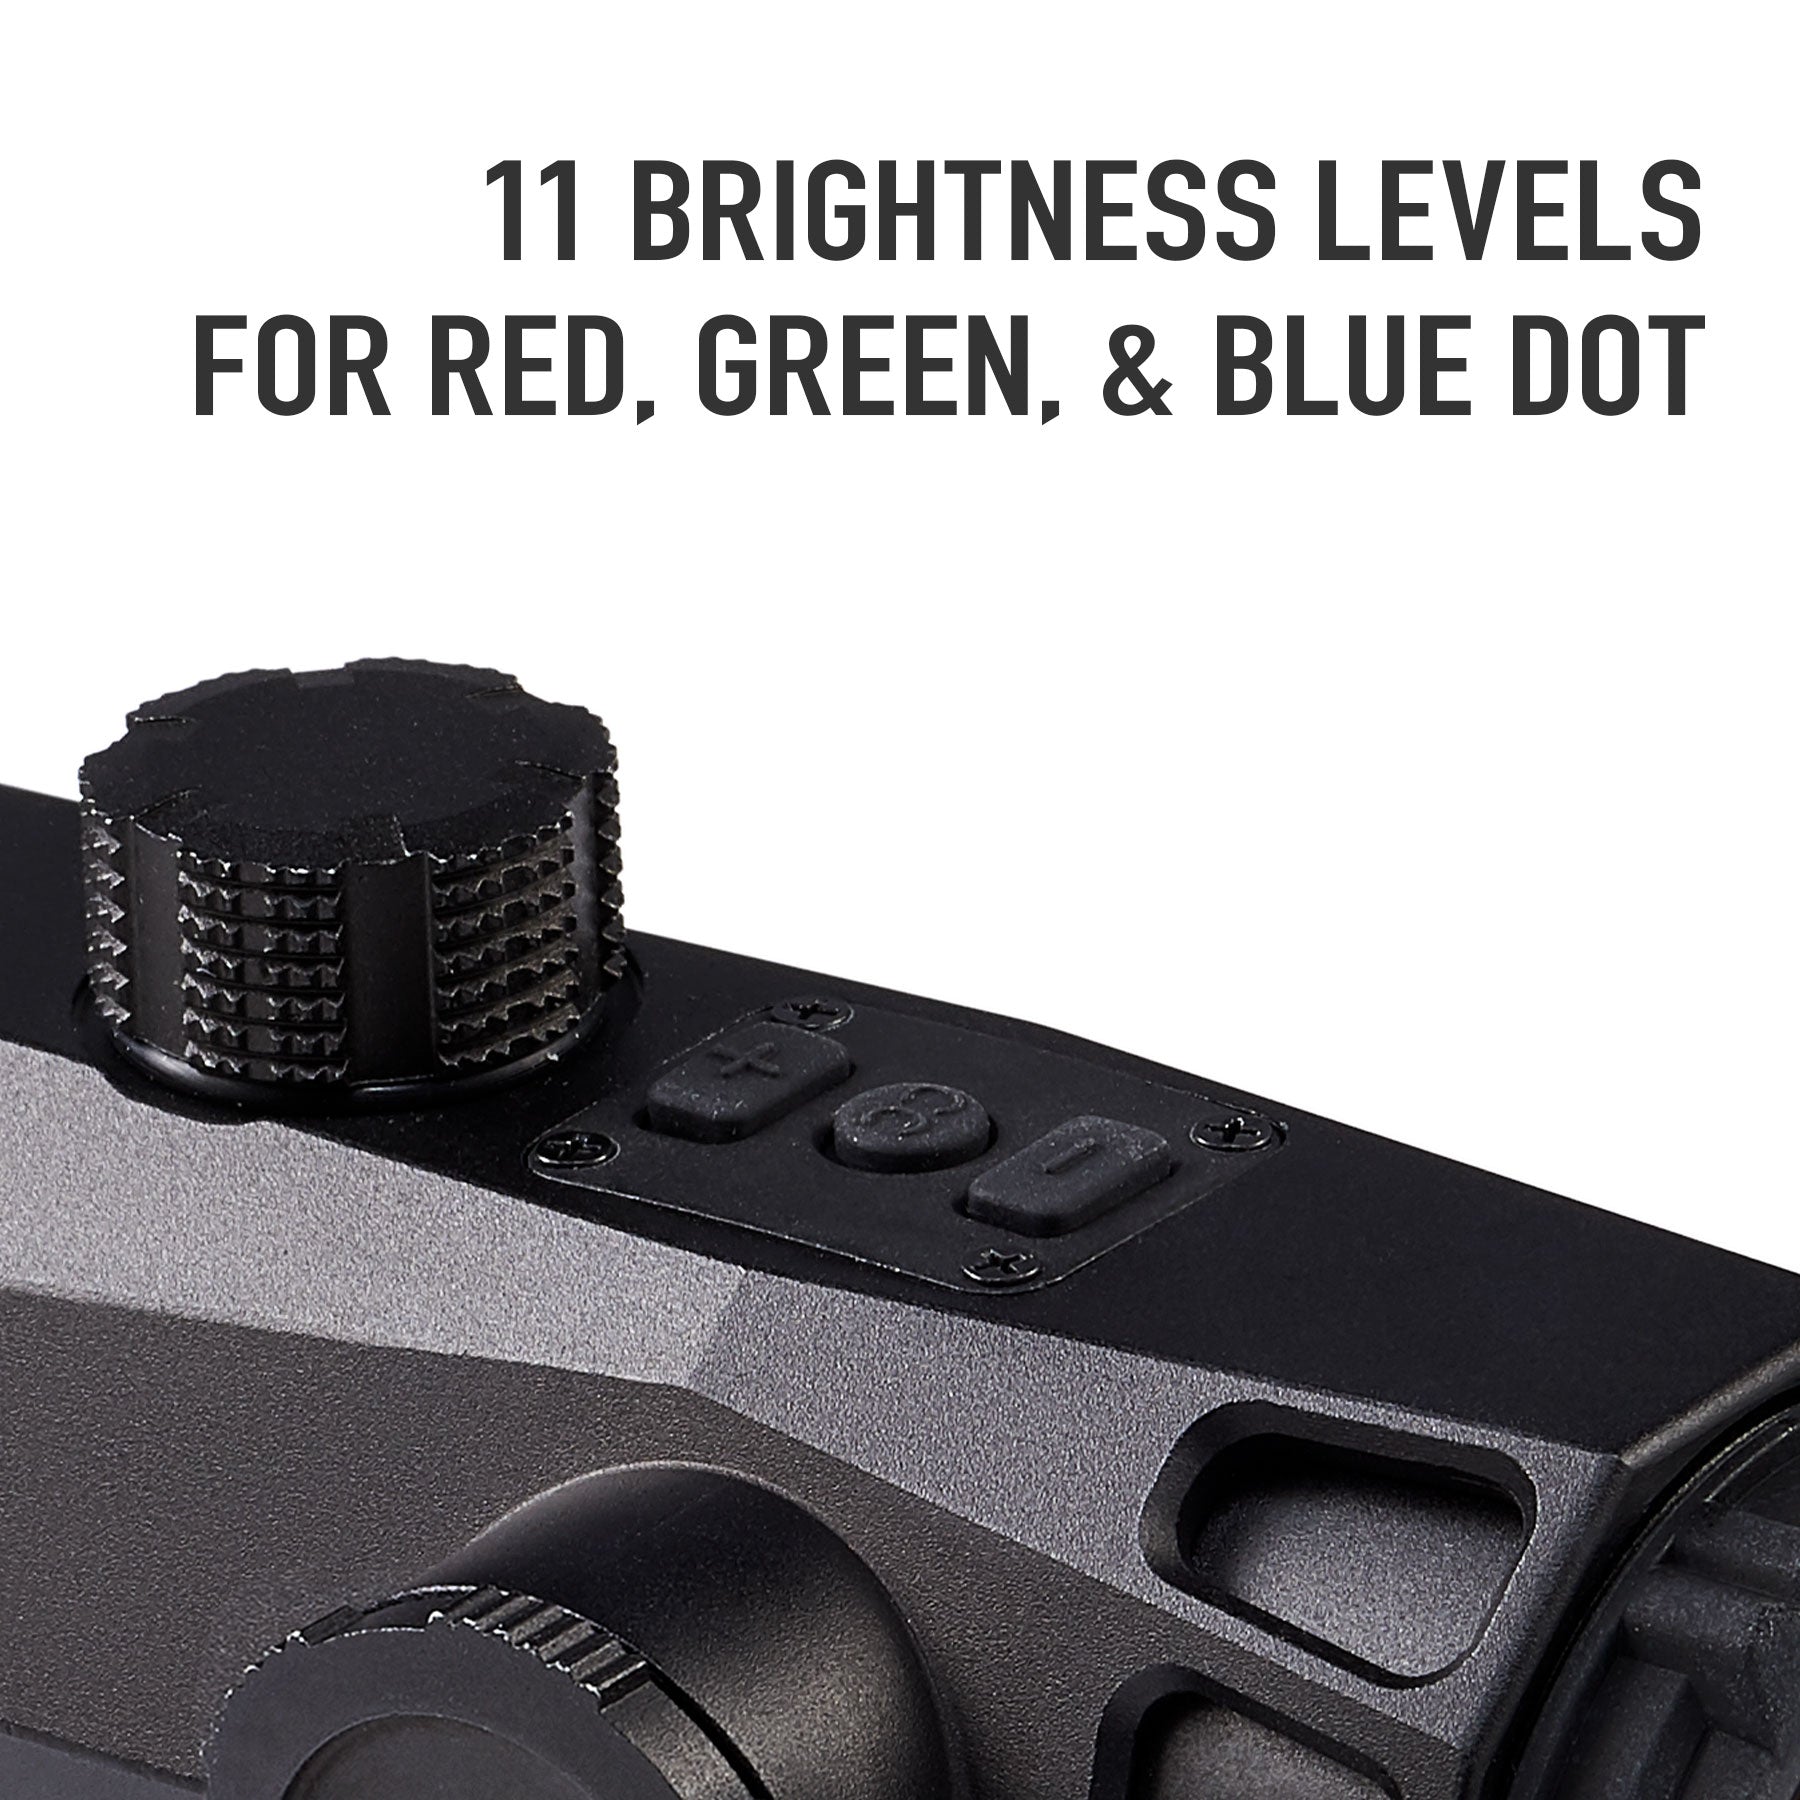 【BUY 1 GET 2 FREE】 4x32 Red Green Blue Illuminated Riflescope Hunting Gear,11 Illumination Multicoated Lenses for 20mm Picatinny